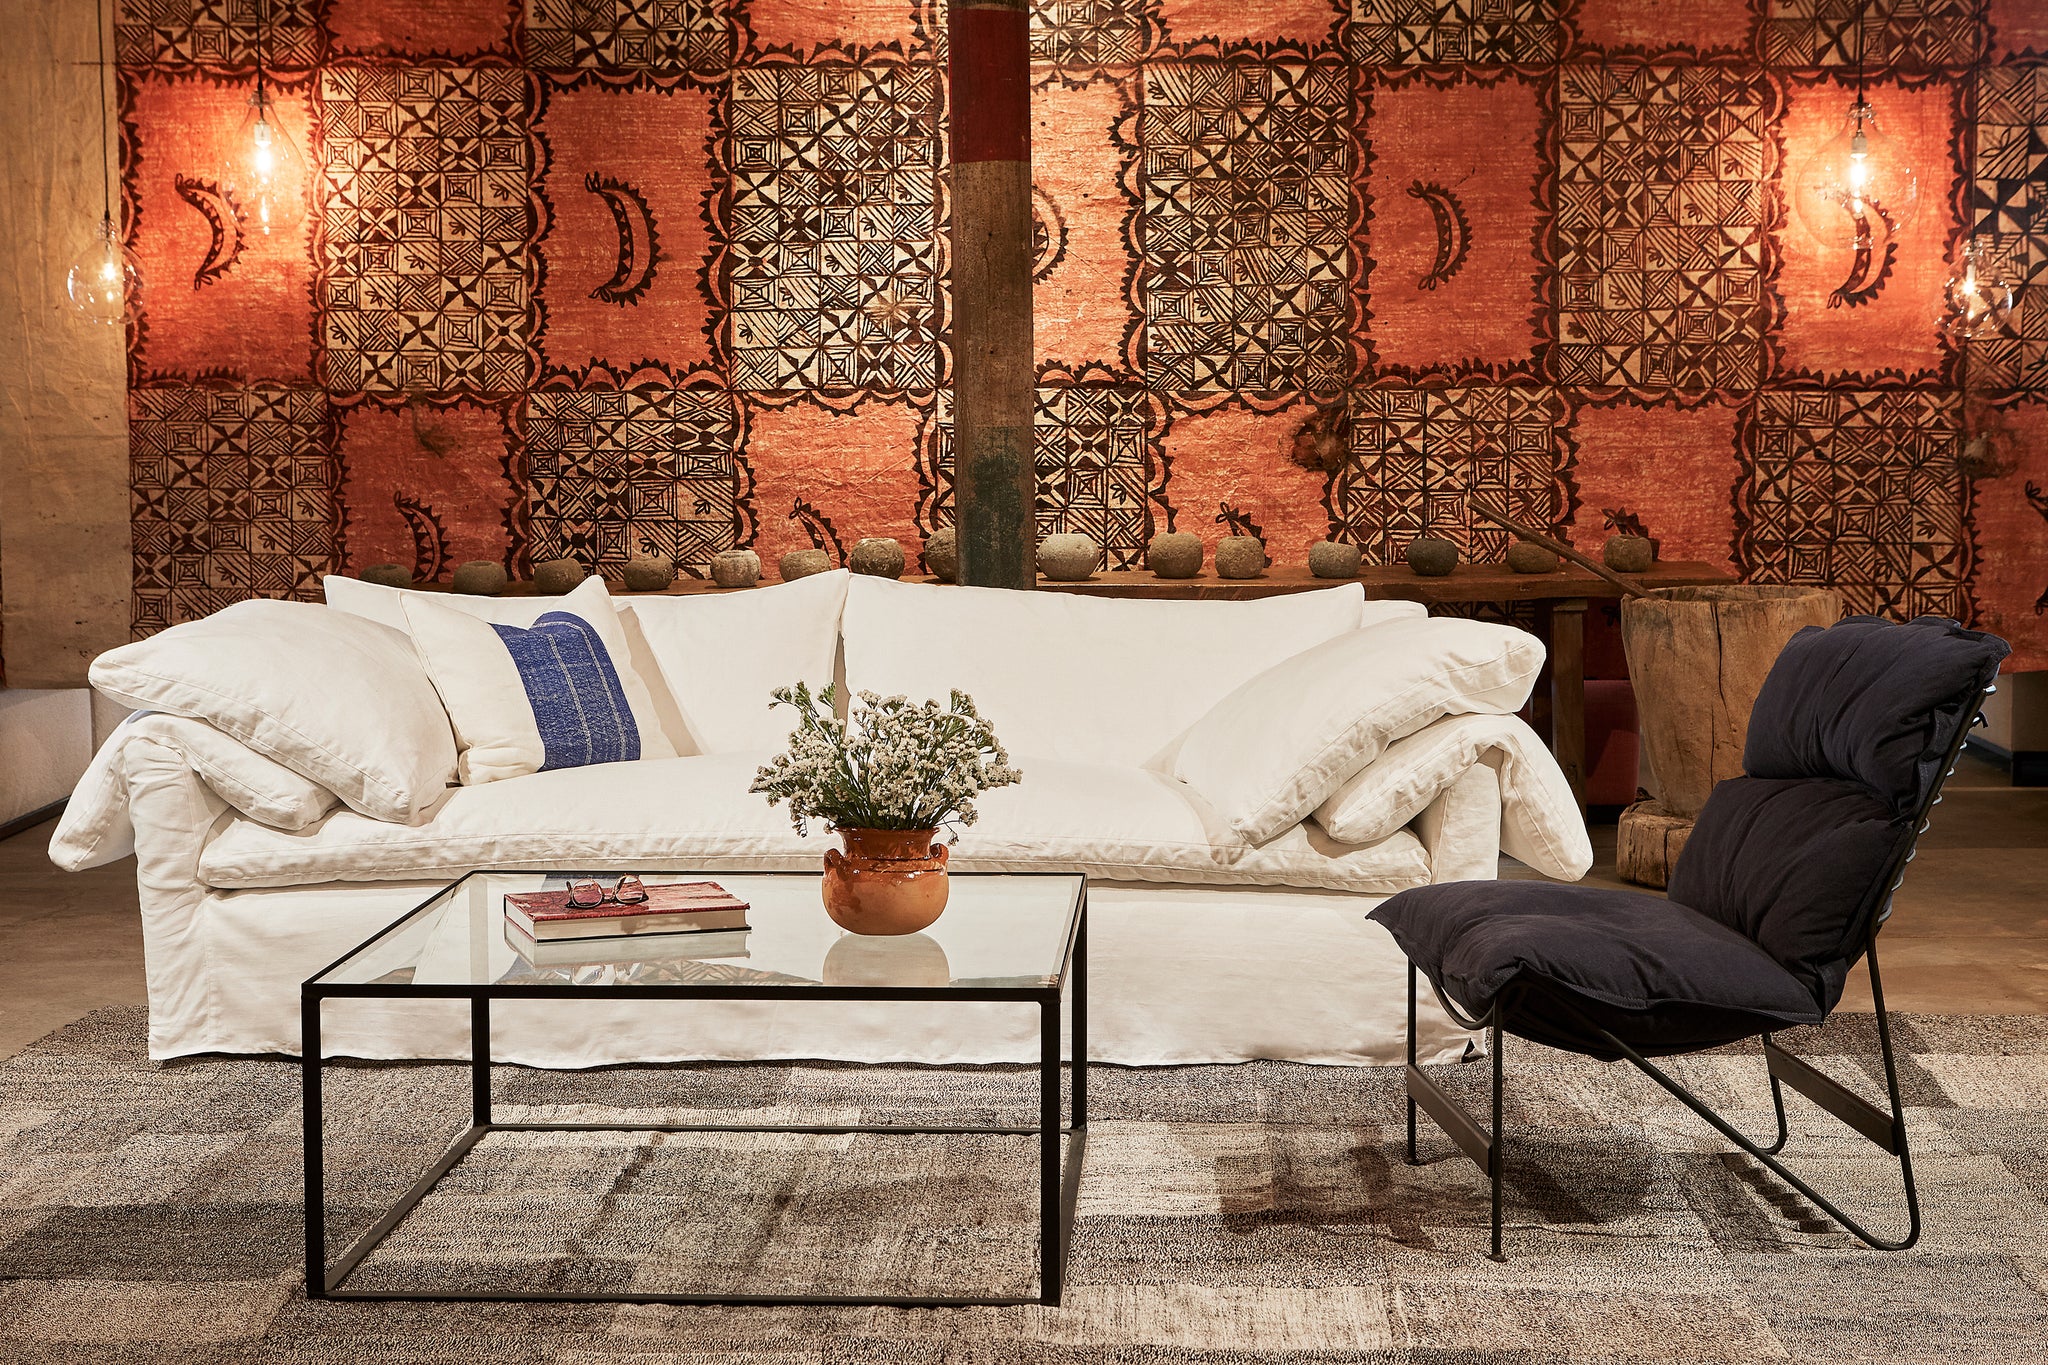  The white linen slipcovered sofa is in front of a vintage Tapa Cloth with orange and brown graphics. The chair on the right side has a metal frame and a dark blue cushion. The coffee table is in metal with a glass top. Photographed in Logan White. 